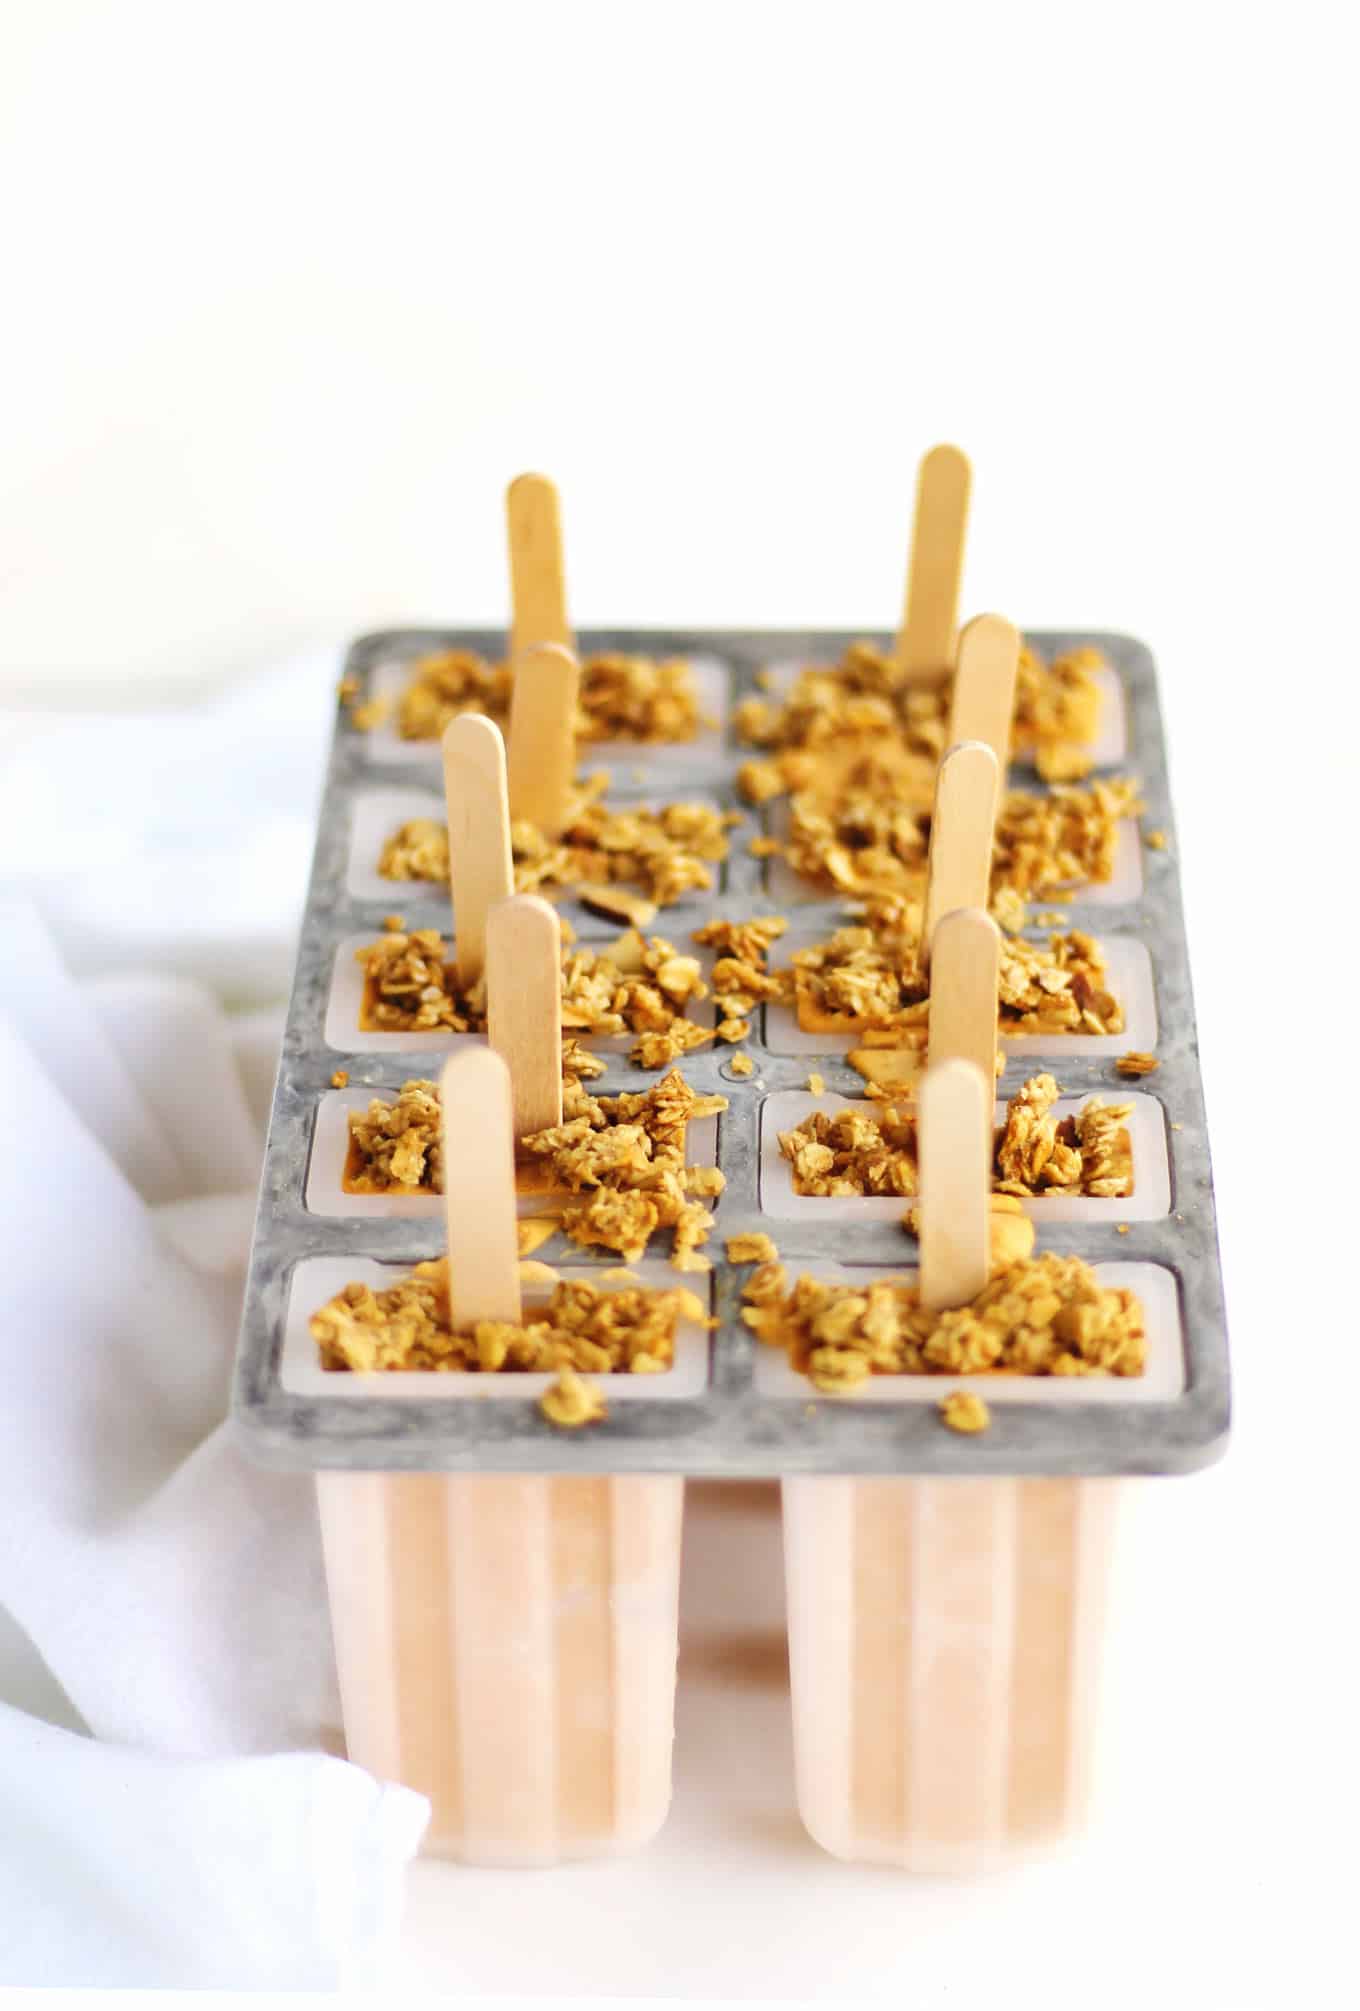 Pumpkin breakfast popsicles in a popsicle mold with granola on top